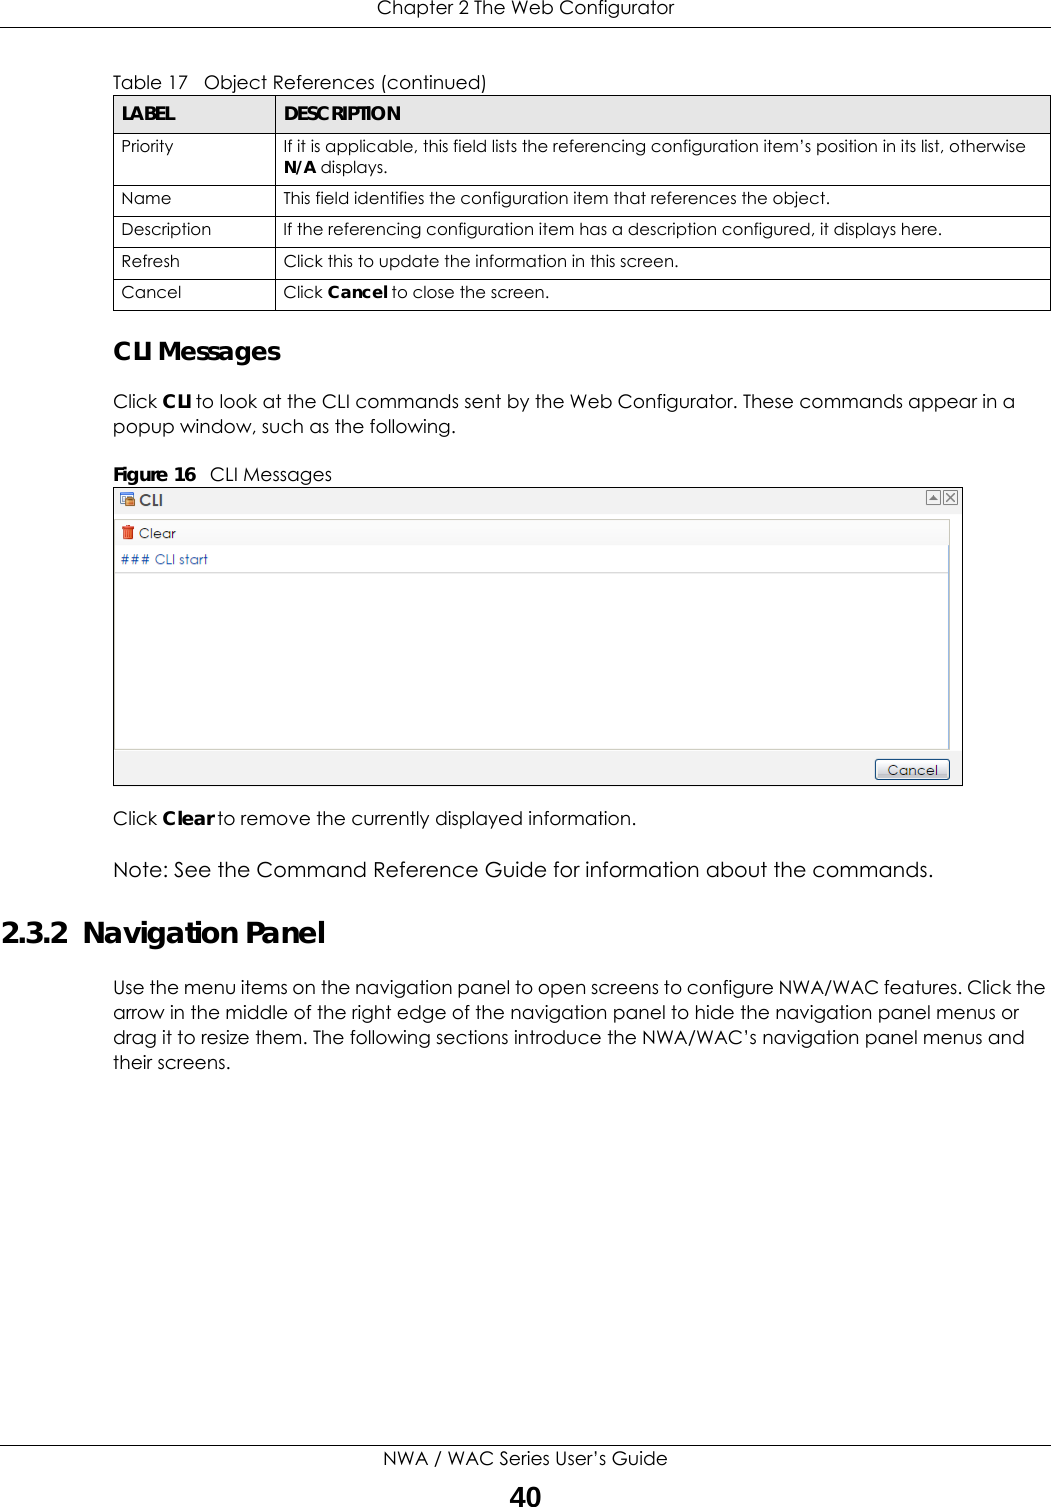 Chapter 2 The Web ConfiguratorNWA / WAC Series User’s Guide40CLI MessagesClick CLI to look at the CLI commands sent by the Web Configurator. These commands appear in a popup window, such as the following.Figure 16   CLI MessagesClick Clear to remove the currently displayed information.Note: See the Command Reference Guide for information about the commands.2.3.2  Navigation PanelUse the menu items on the navigation panel to open screens to configure NWA/WAC features. Click the arrow in the middle of the right edge of the navigation panel to hide the navigation panel menus or drag it to resize them. The following sections introduce the NWA/WAC’s navigation panel menus and their screens.Priority If it is applicable, this field lists the referencing configuration item’s position in its list, otherwise N/A displays.Name This field identifies the configuration item that references the object.Description If the referencing configuration item has a description configured, it displays here. Refresh Click this to update the information in this screen.Cancel Click Cancel to close the screen.Table 17   Object References (continued)LABEL DESCRIPTION